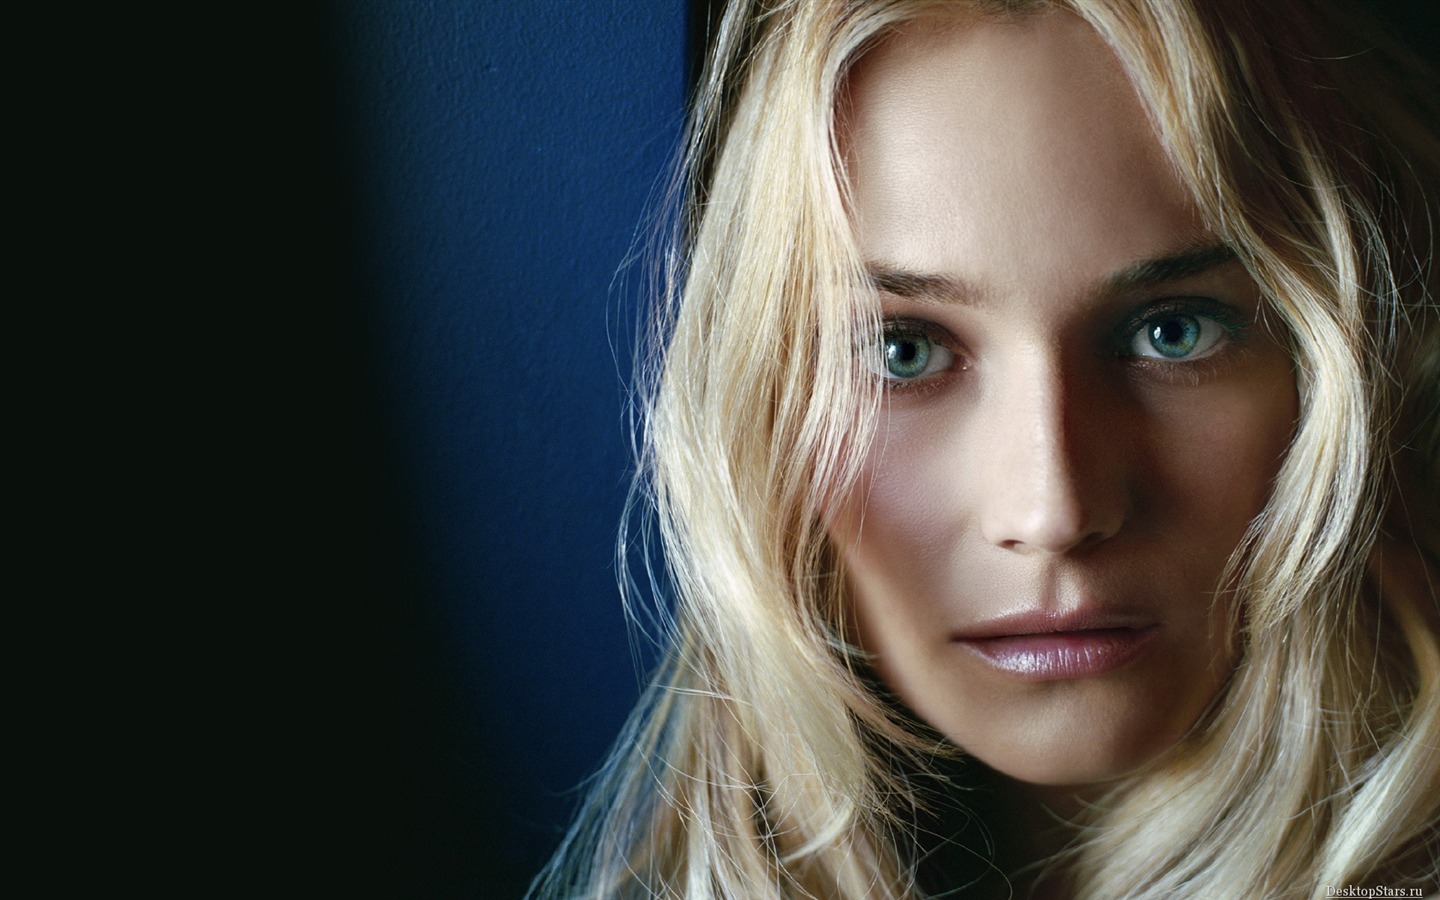 Diane Kruger #007 - 1440x900 Wallpapers Pictures Photos Images